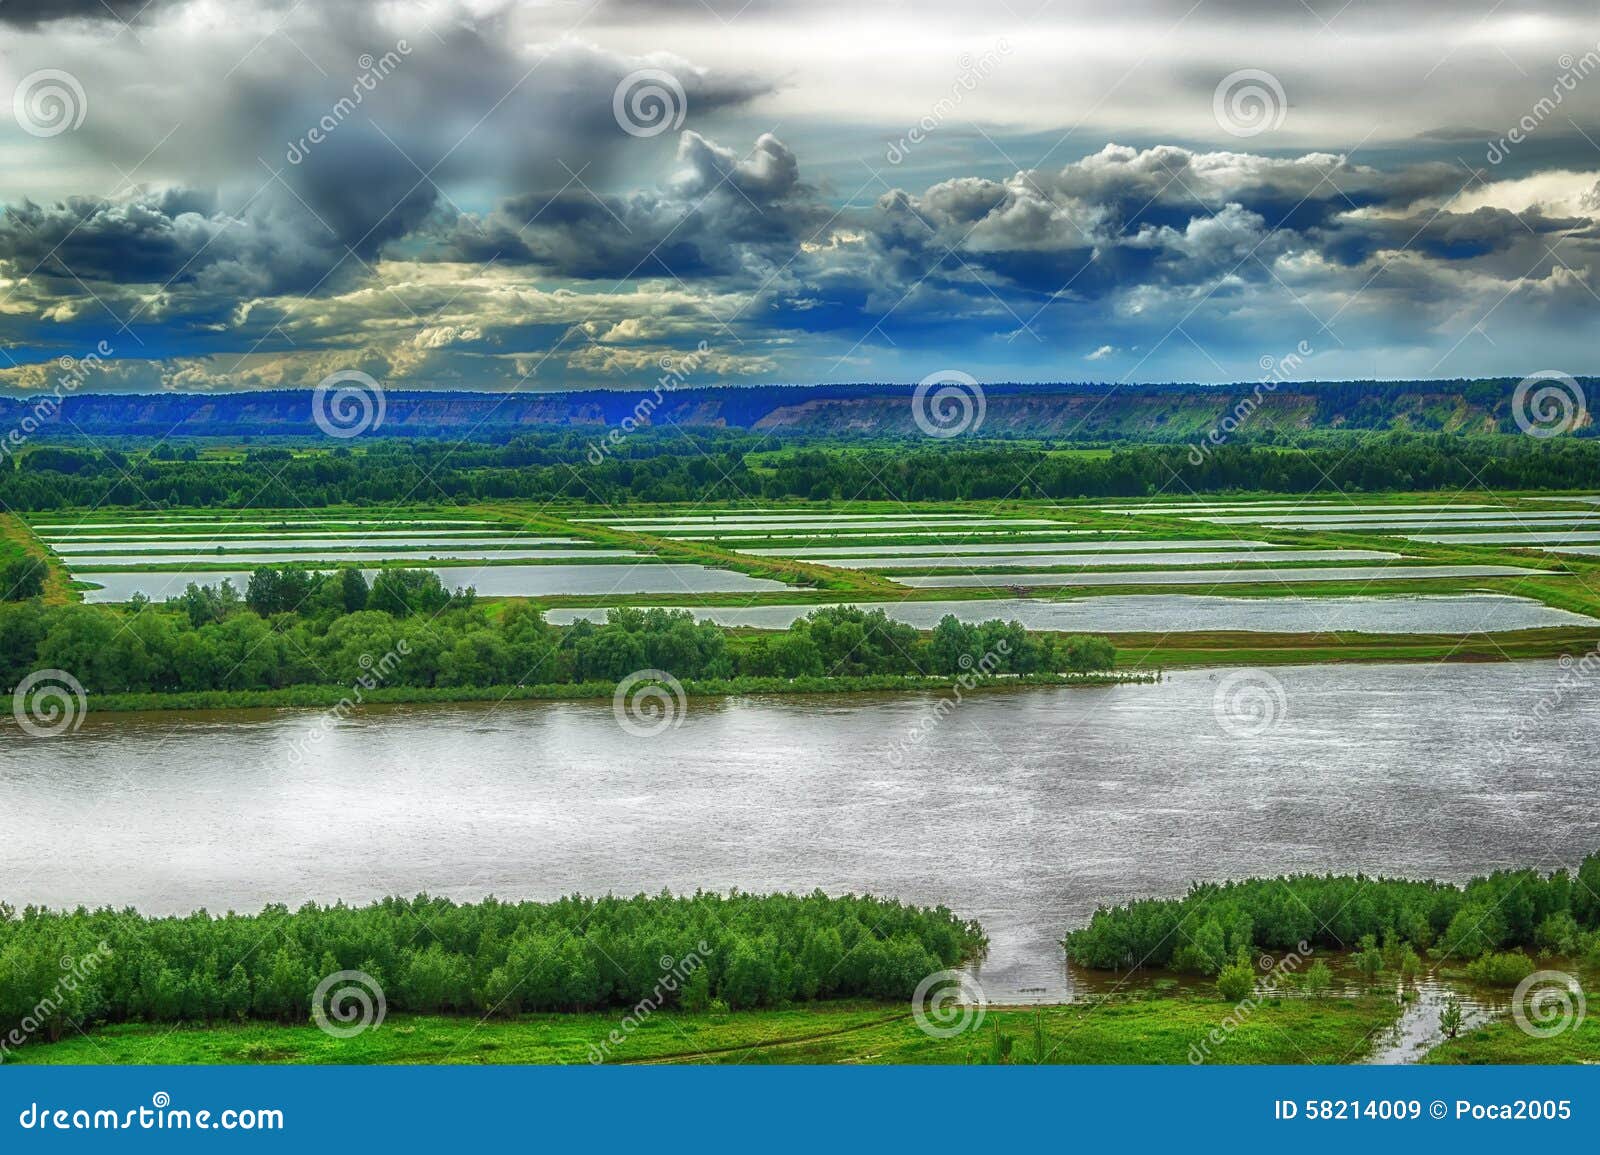 Aerial View Of The River Irtysh Russia Siberia Stock Image Image Of